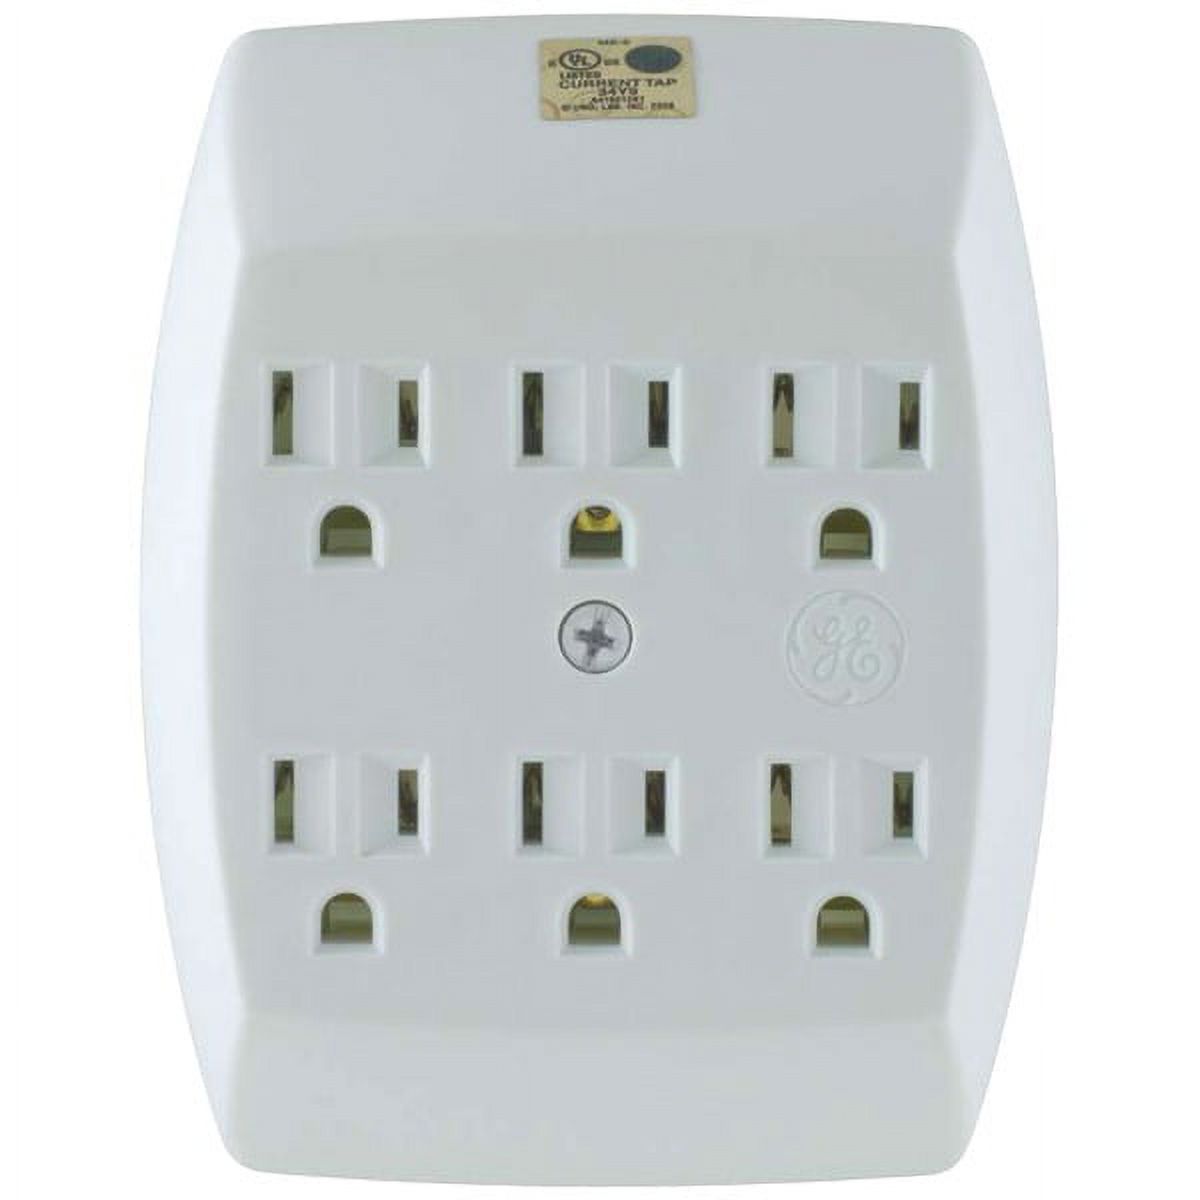 GE 3-Prong 6 Outlet Wall Adapter and Grounding Hex Tap, (White) - image 1 of 4